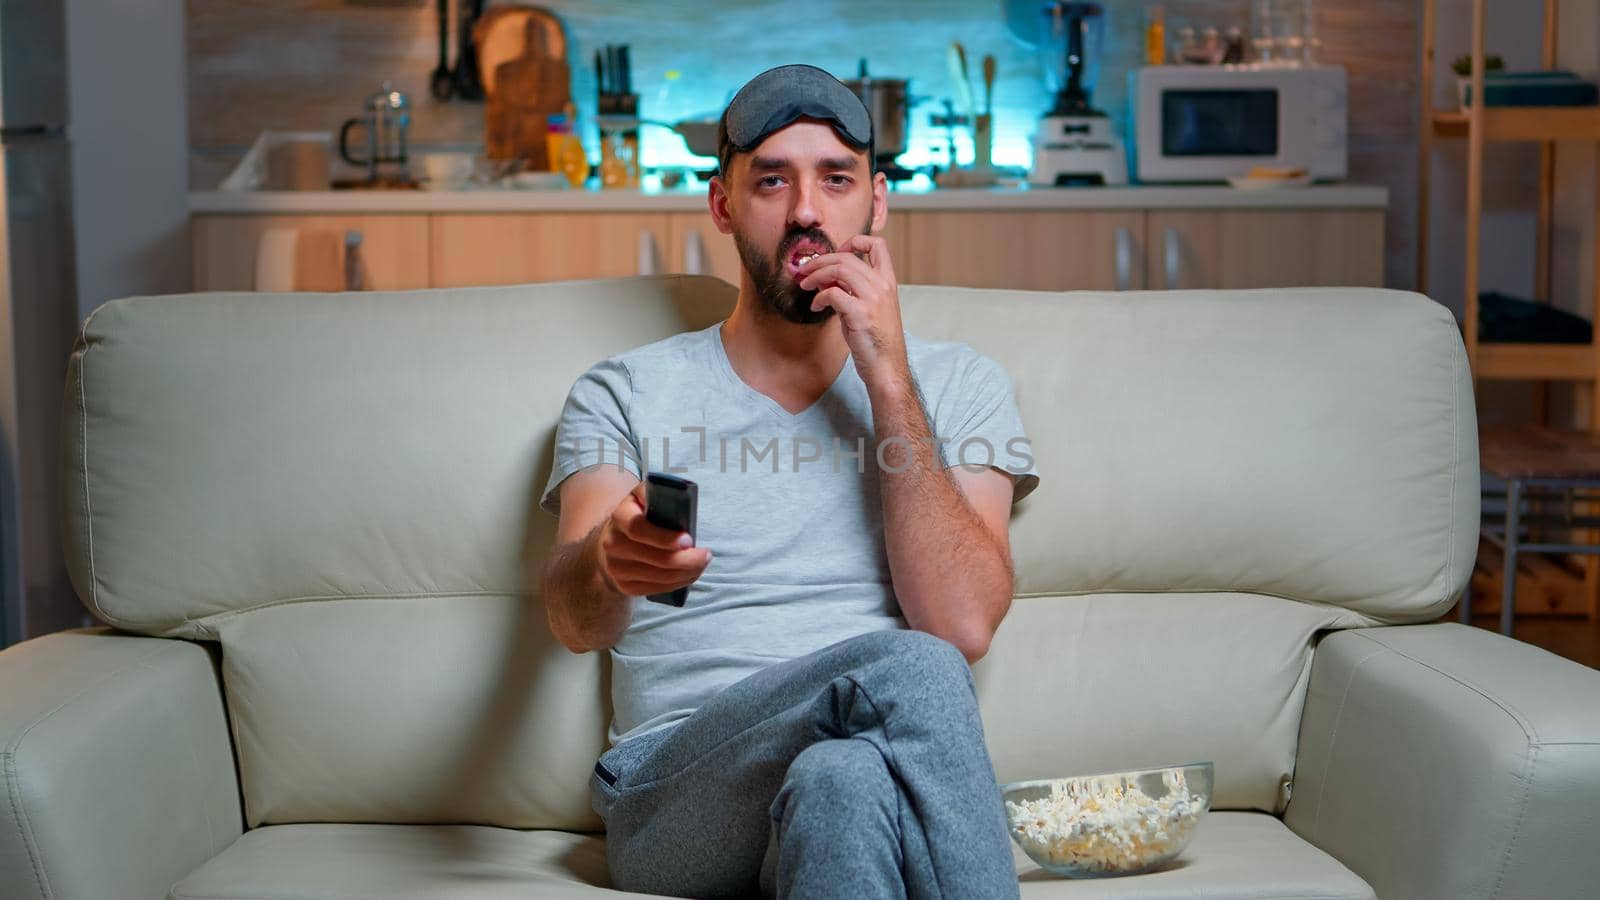 Adult man eating popcorn while standing in front of television on sofa looking at tv lifestyle shows. Caucasian male with eye sleep mask relaxing alone late at night in kitchen